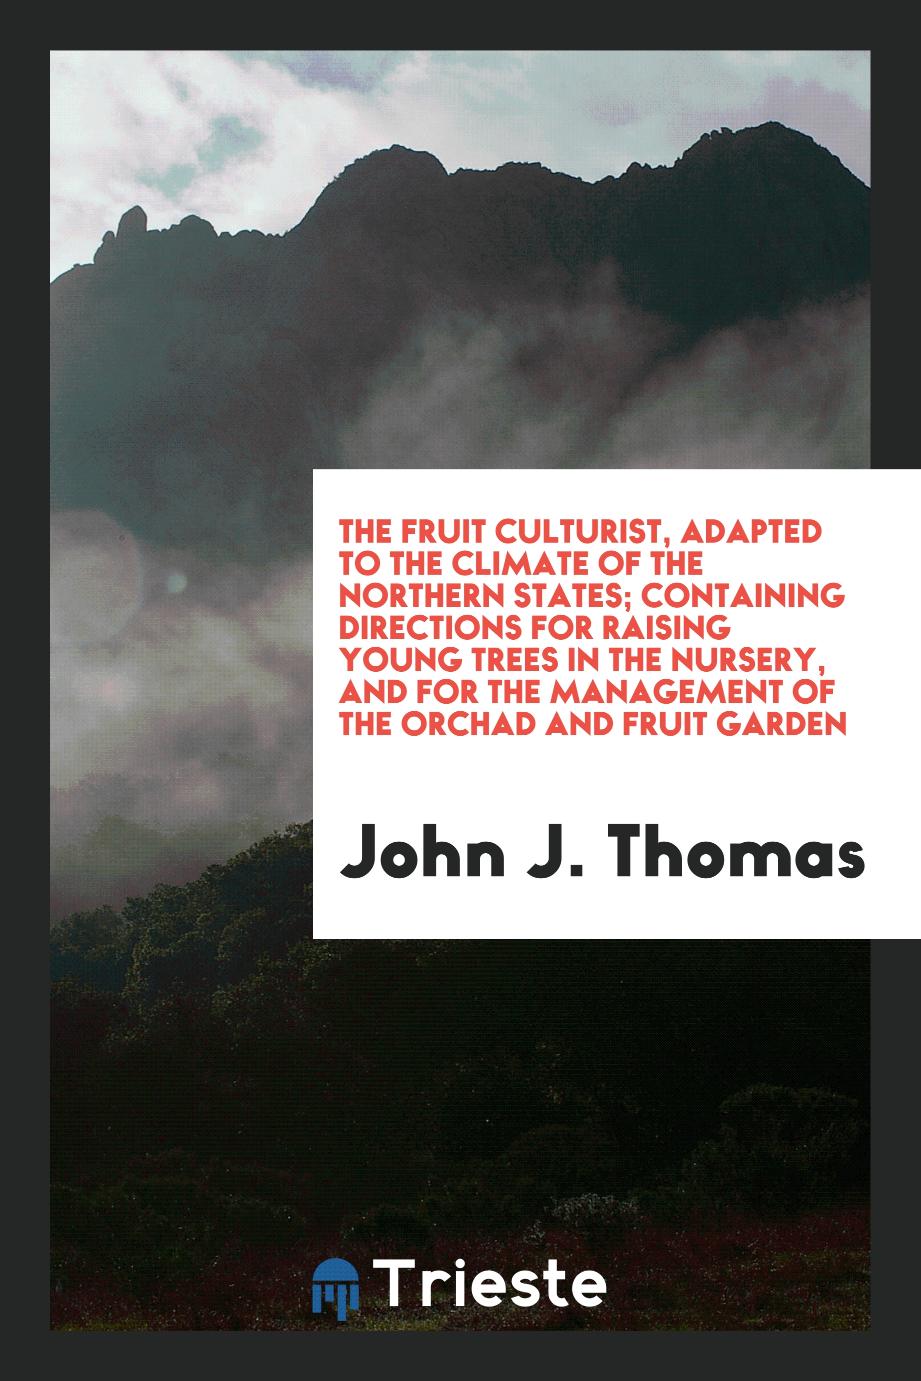 The Fruit Culturist, Adapted to the Climate of the Northern States; Containing Directions for Raising Young Trees in the Nursery, and for the Management of the Orchad and Fruit Garden